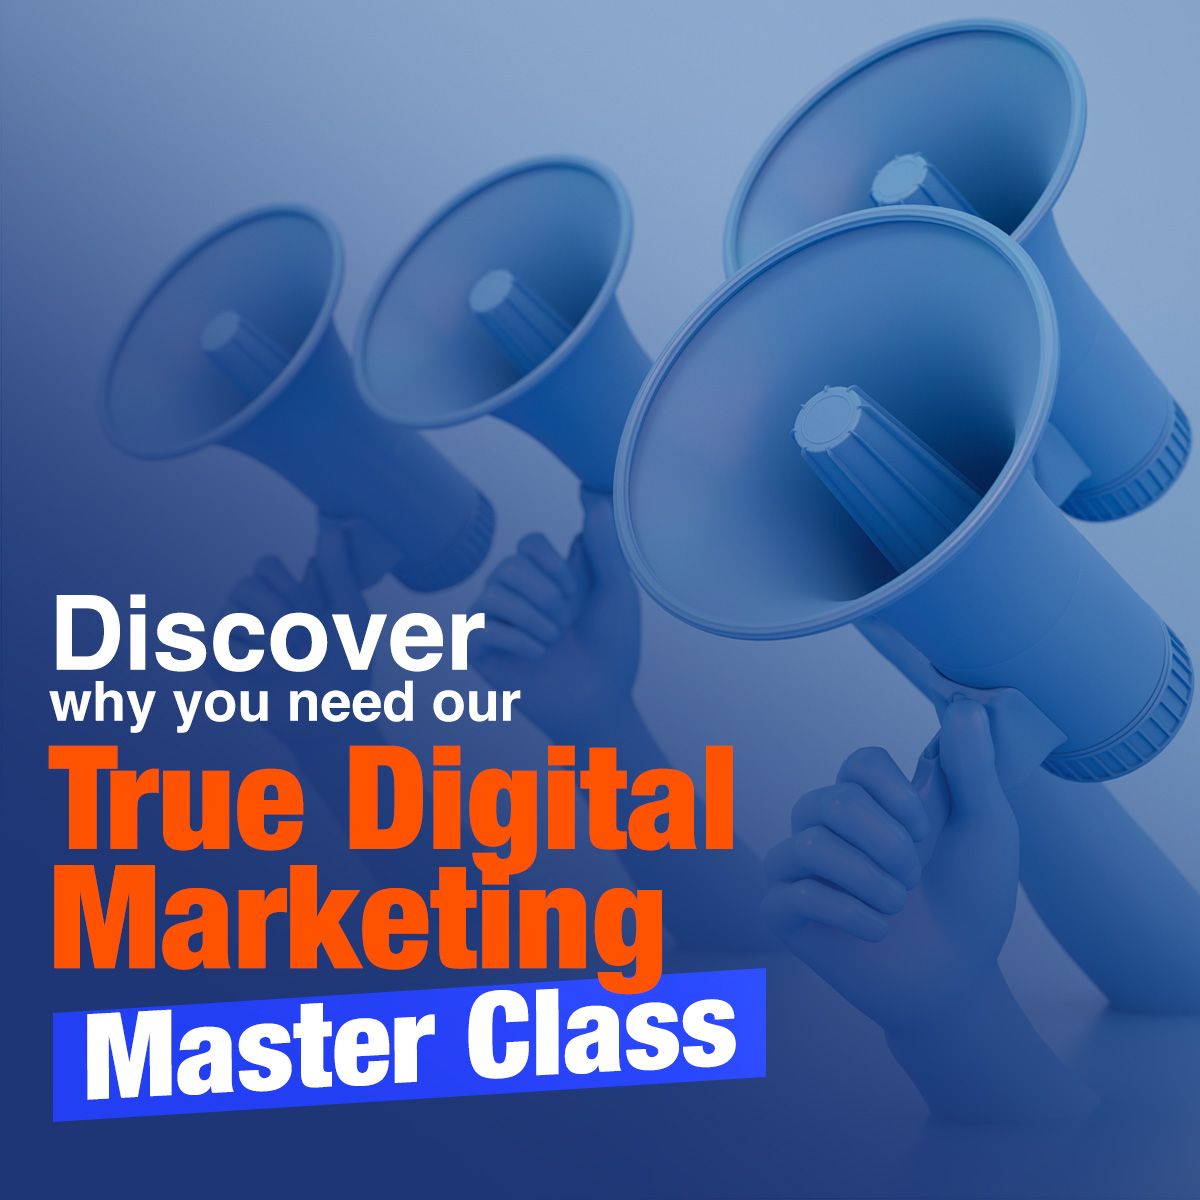 Discover why you need our True Digital Marketing Master Class